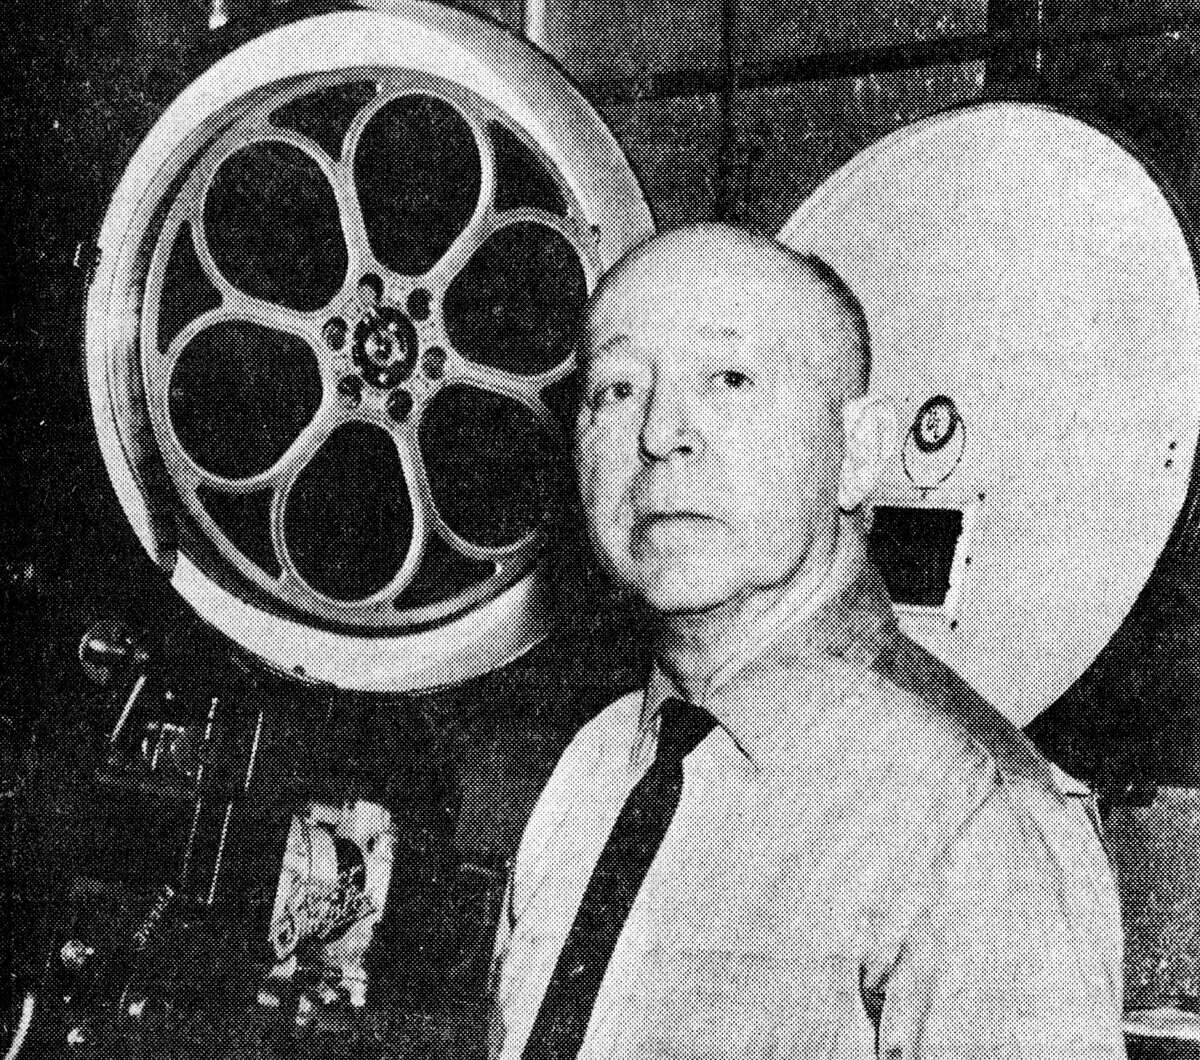 Arthur “Shorty” Bureau, Sr. is shown near one of the two huge movie projectors at the Vogue Theatre where he has been the projectionist since the Vogue went into operation in January 1938. The veteran projectionist ended 53 years of employment at local theater last Saturday. The photo was published in the News Advocate on Jan. 5, 1962.